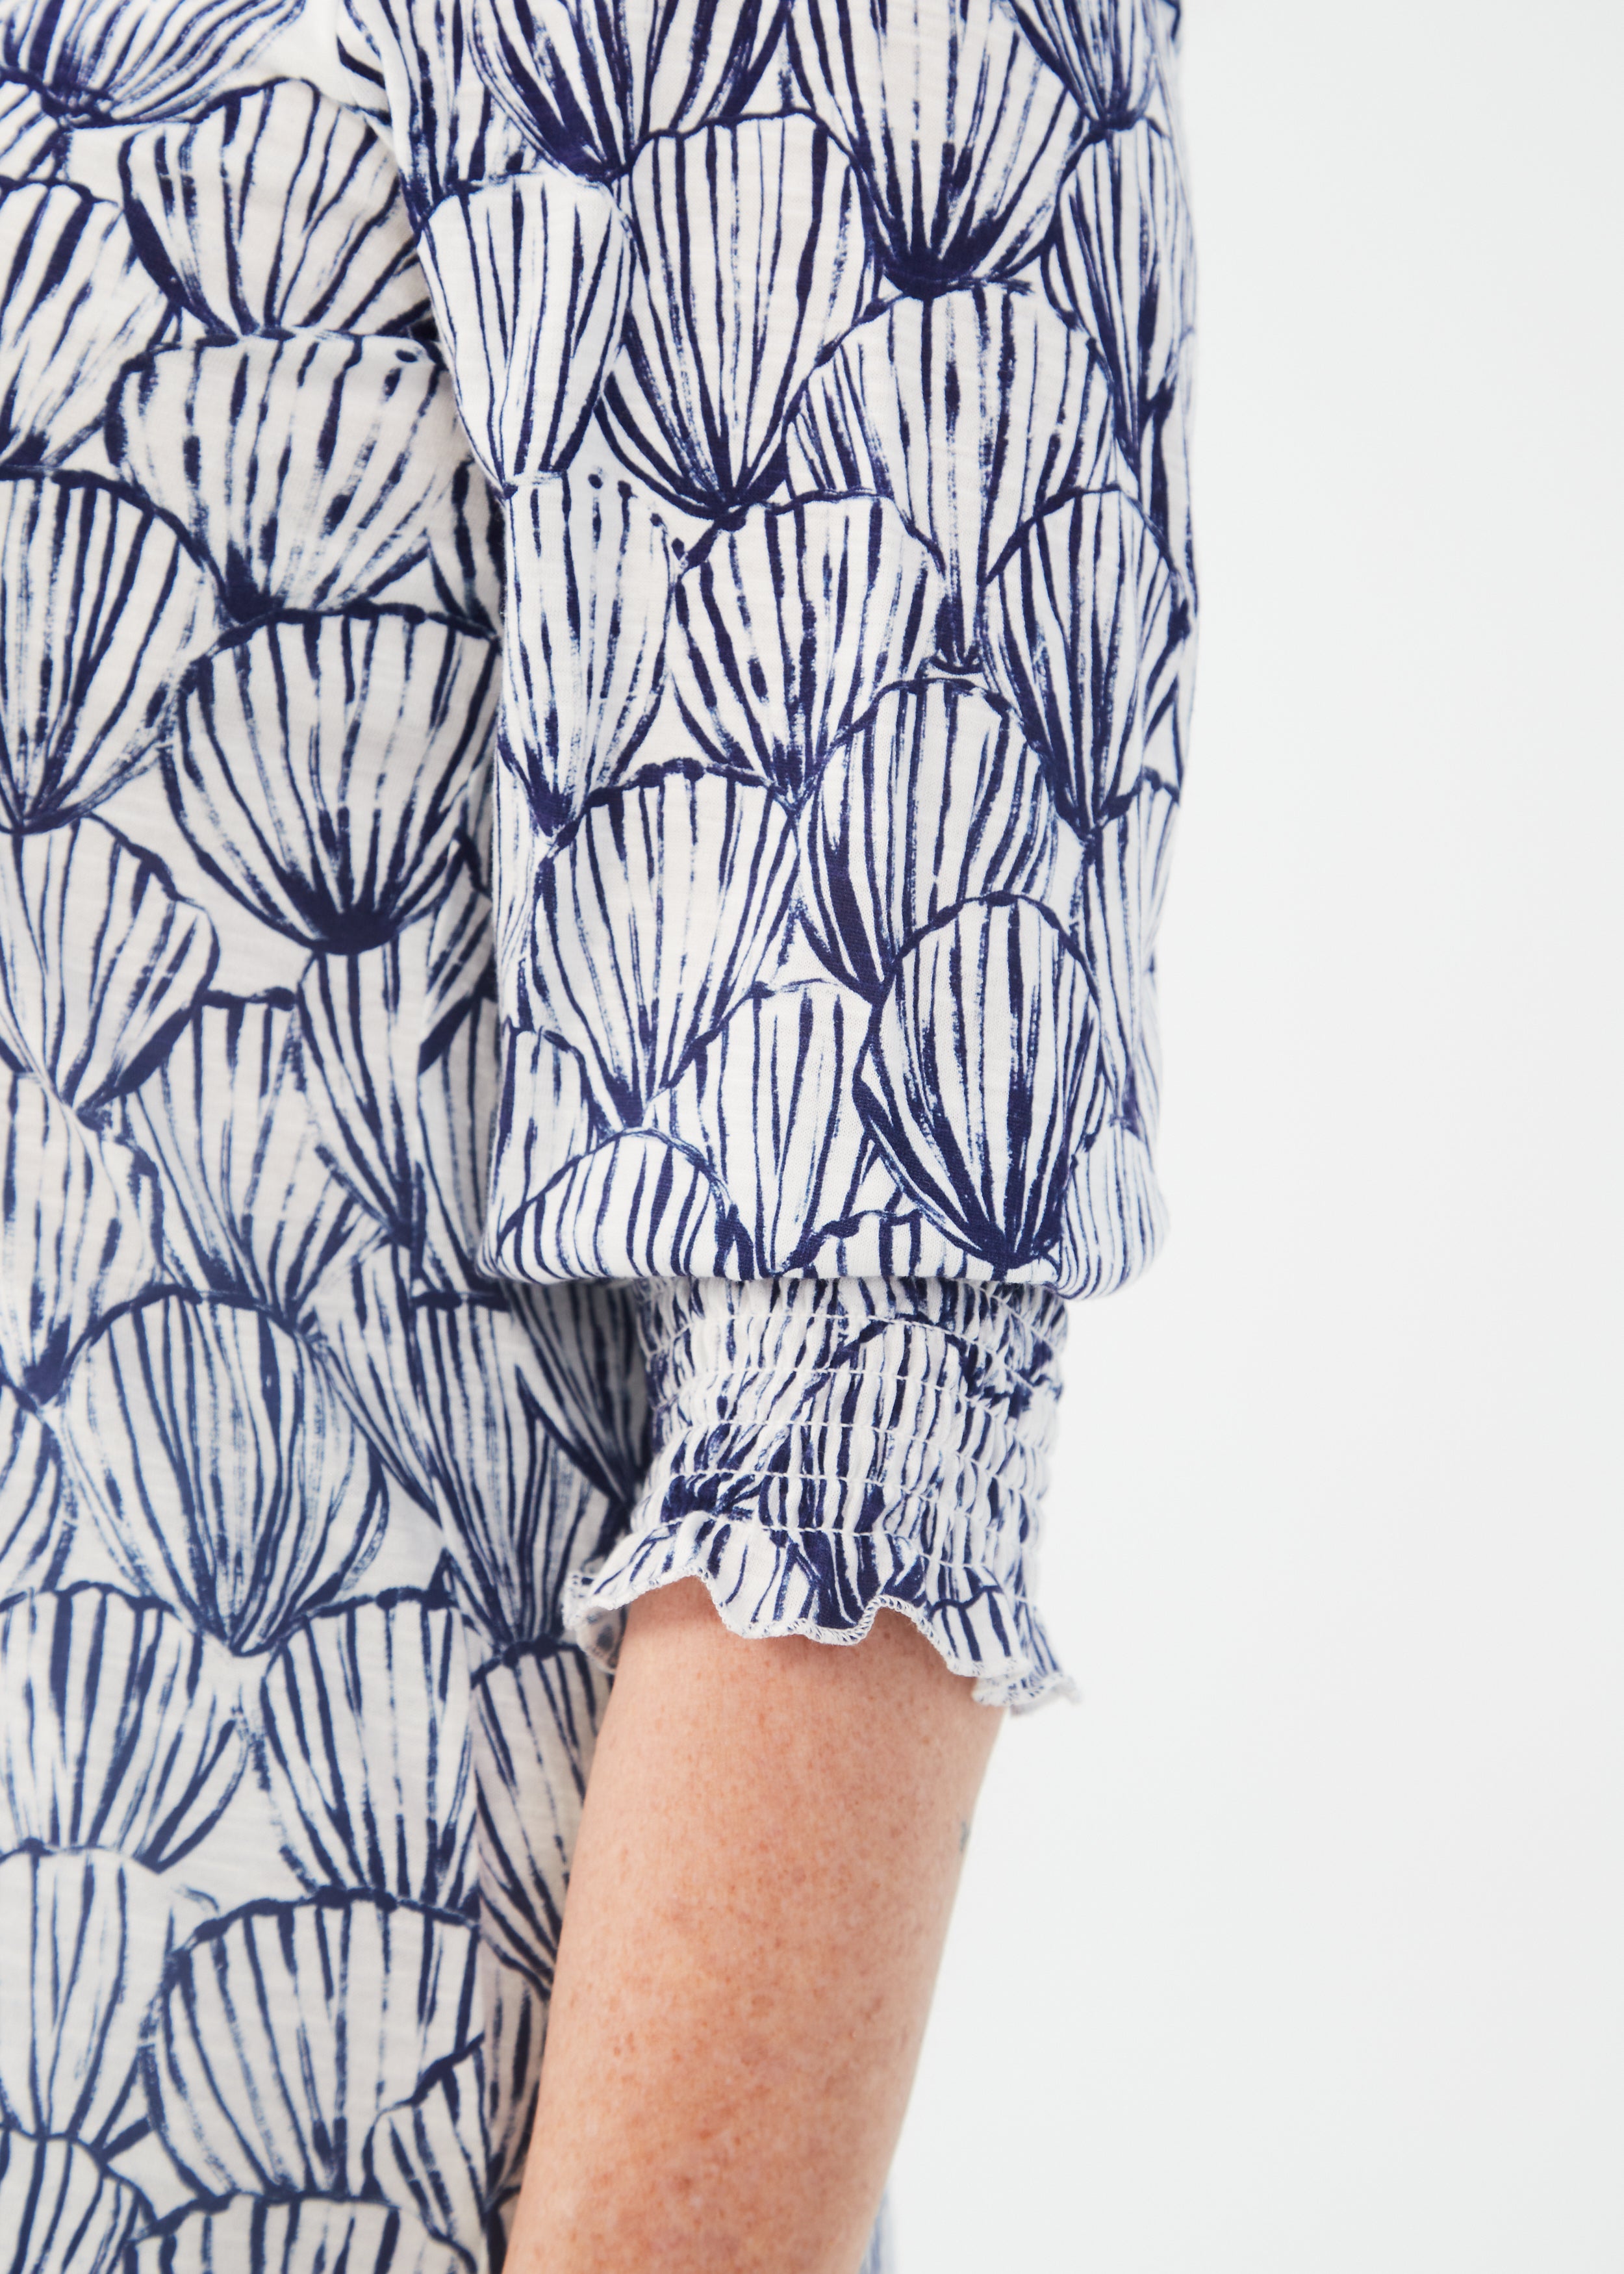 Introducing the FDJ Printed V-Neck Top with Smocked Cuffs, featuring a Shell Etching print in blue & white.